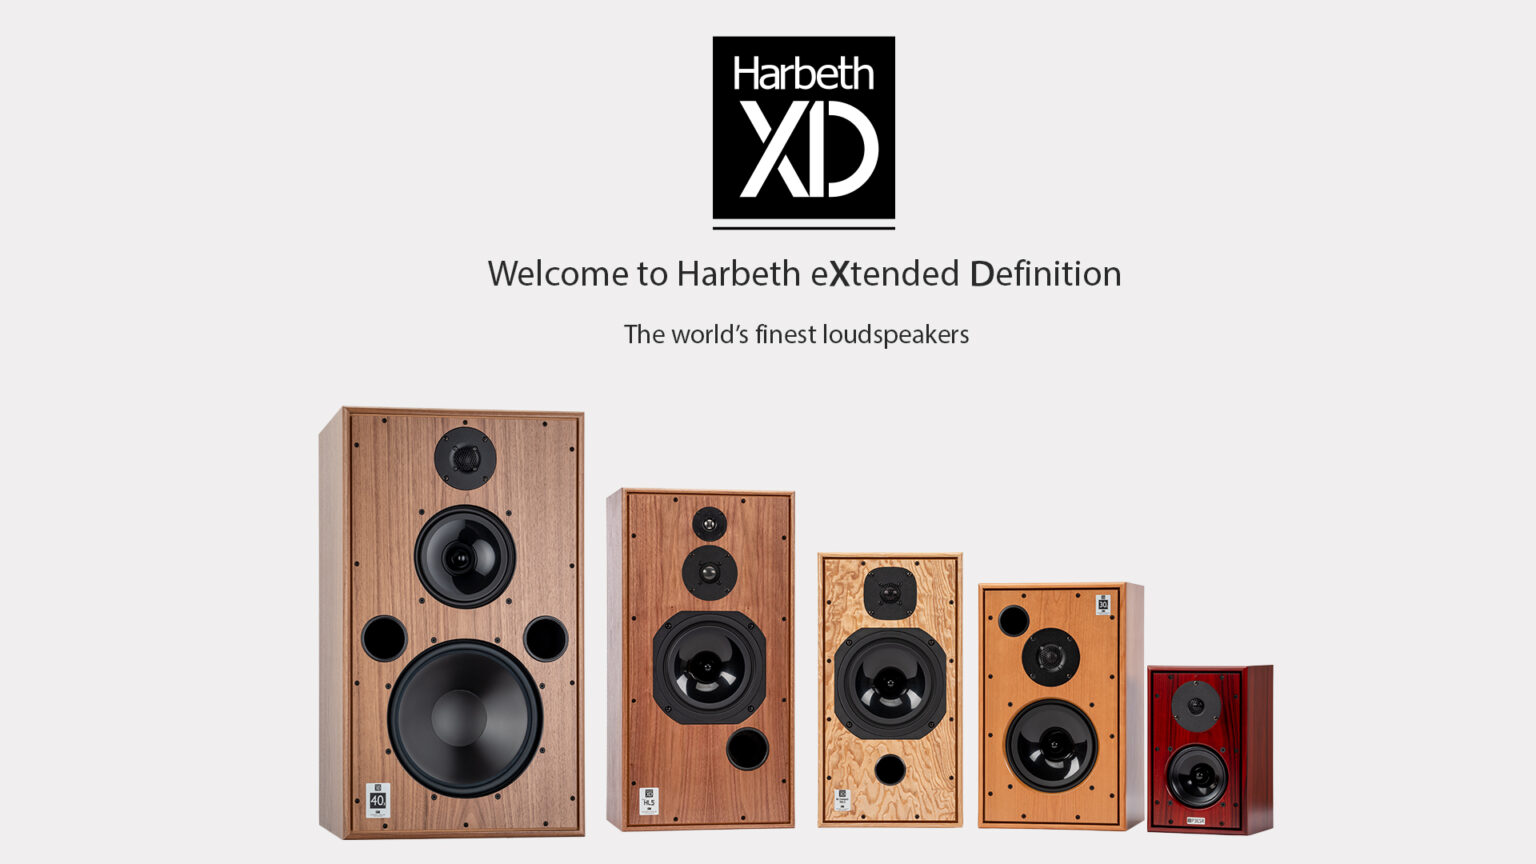 Why Are Harbeth Speakers So Expensive